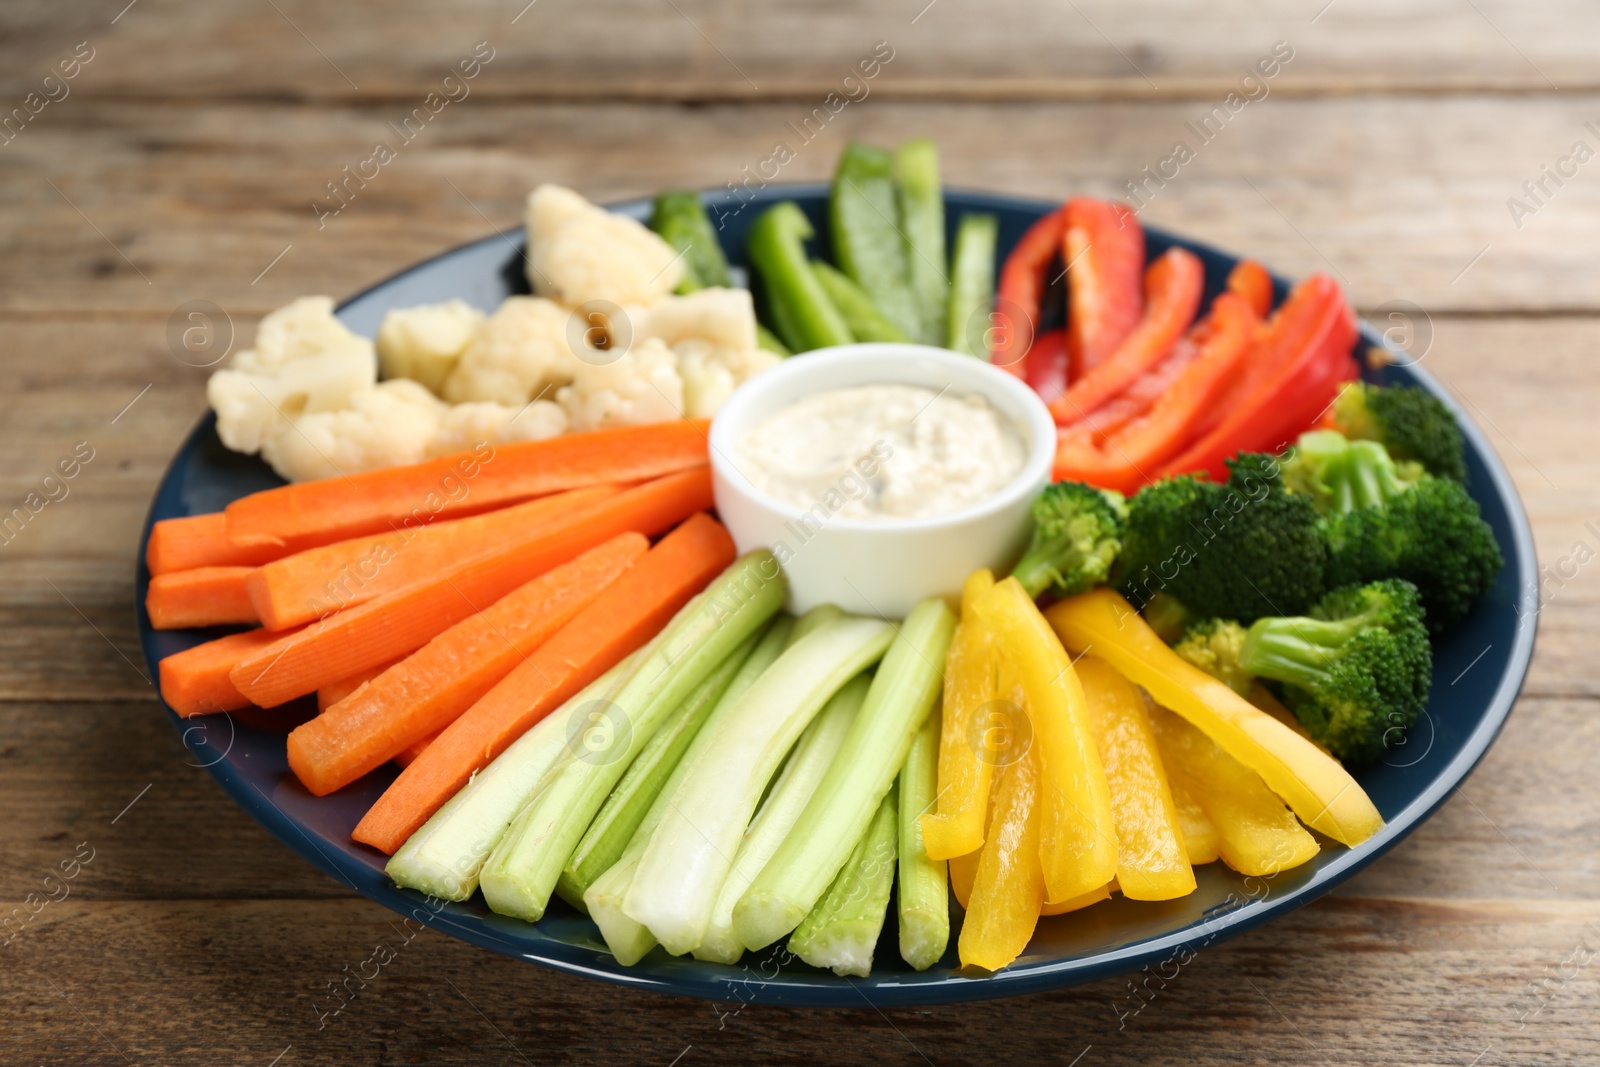 Photo of Plate with celery sticks, other vegetables and dip sauce on wooden table, closeup